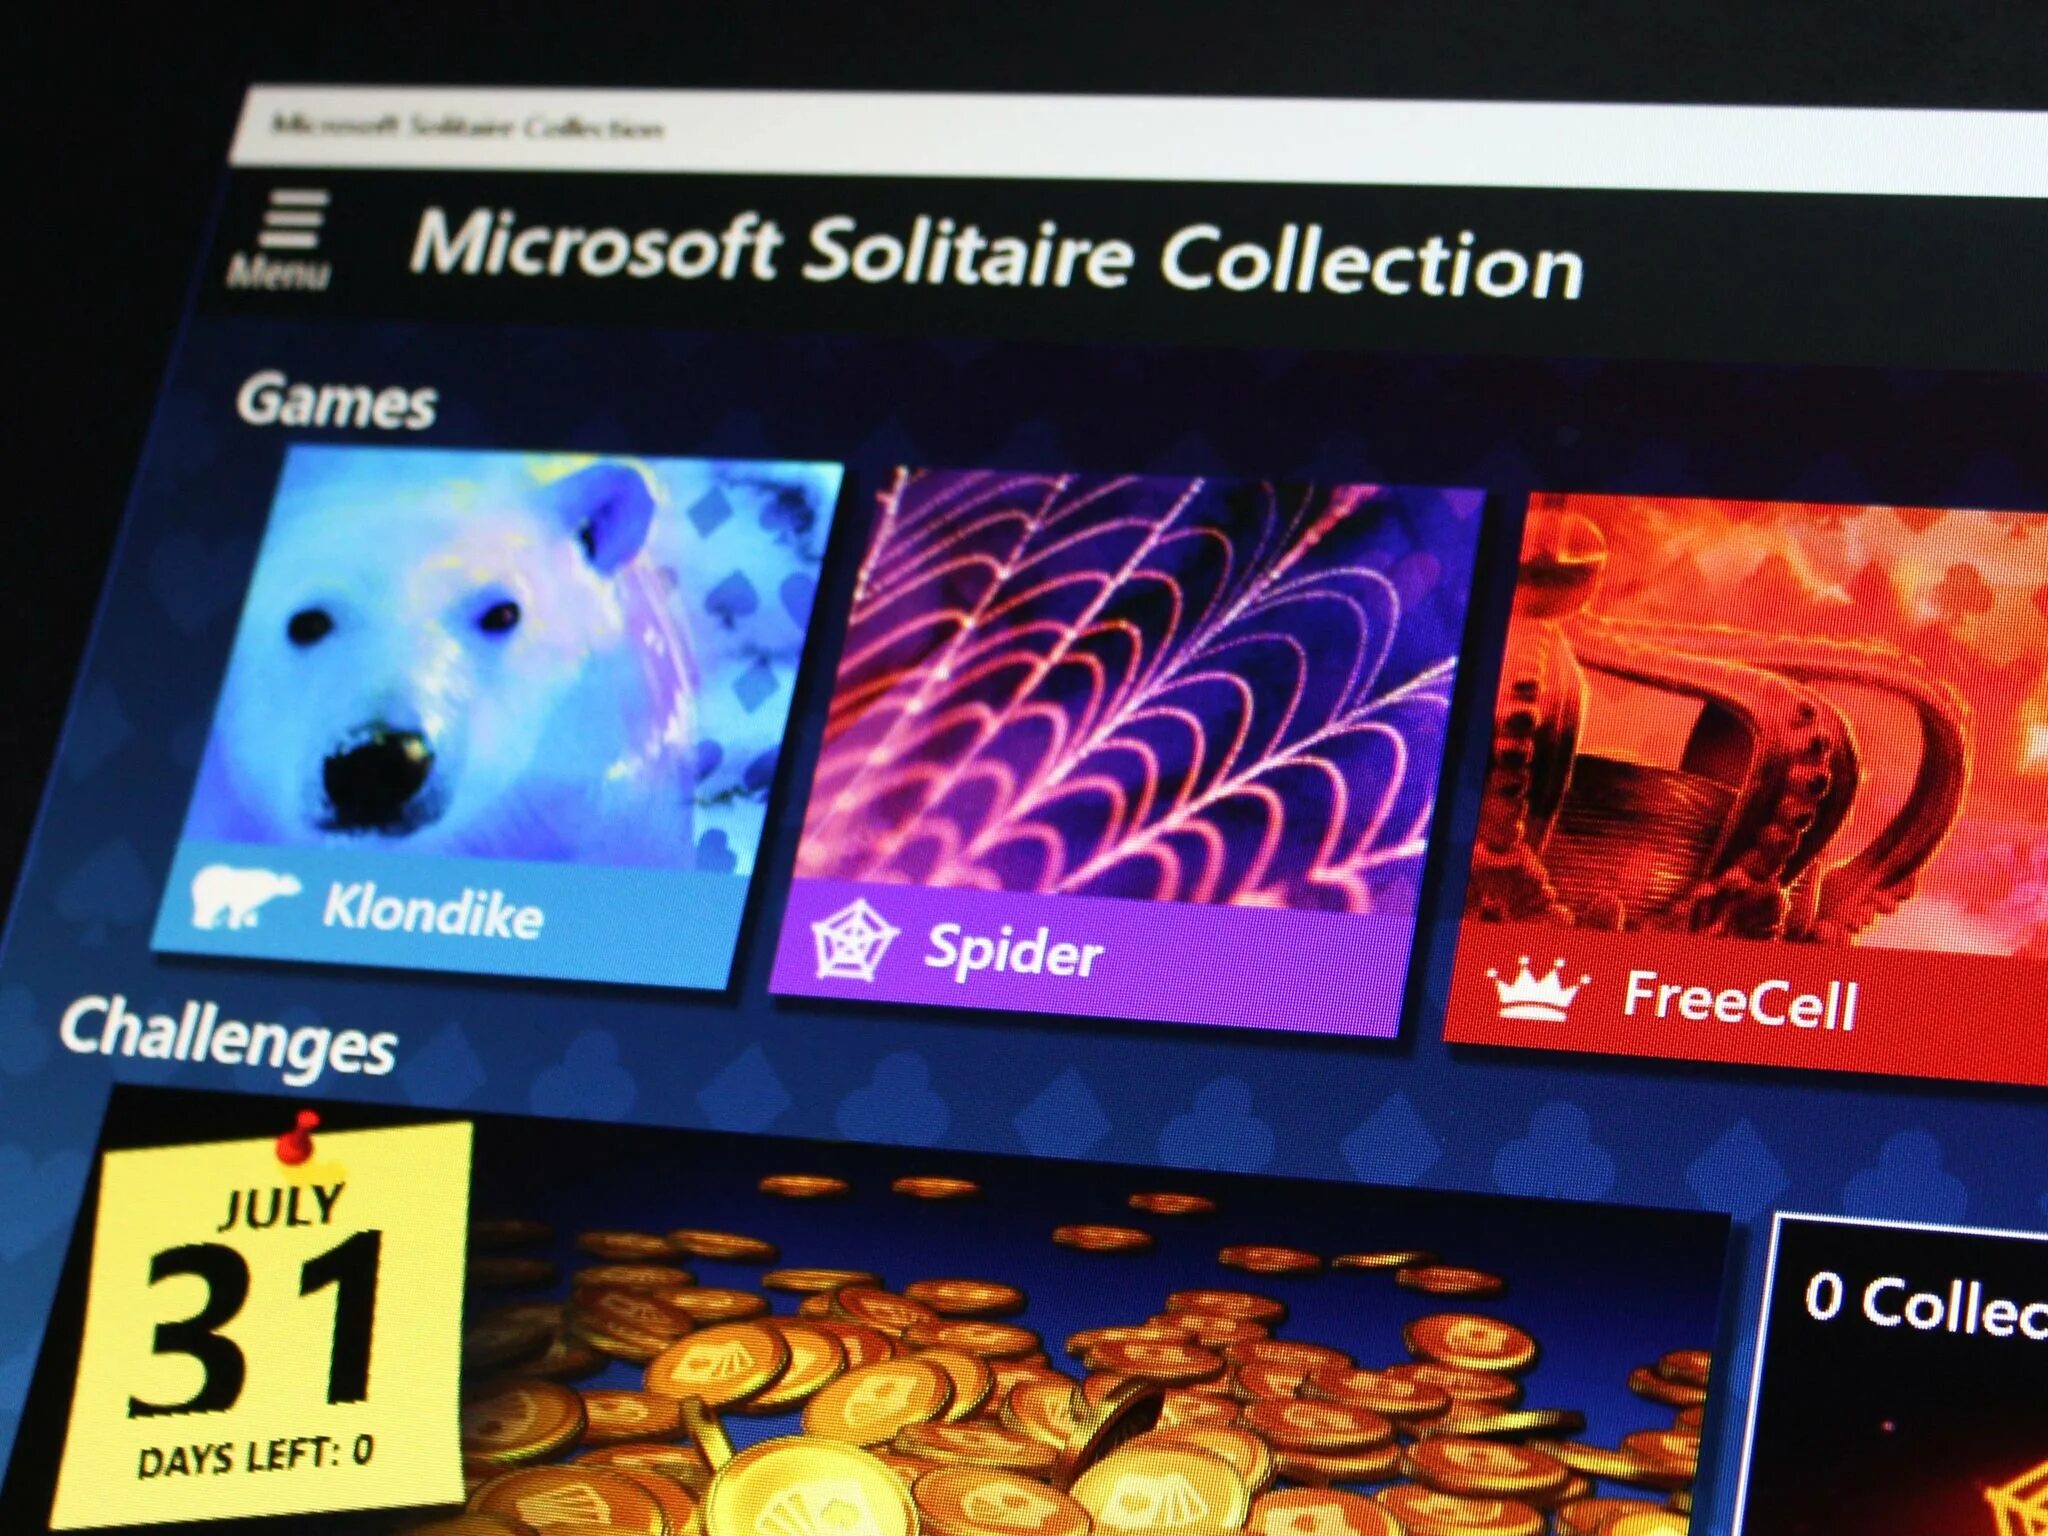 Windows solitaire collection. Microsoft.Microsoft Solitaire collection. Игры Microsoft Solitaire collection. Microsoft Солитер коллекция. Солитер коллекшн.